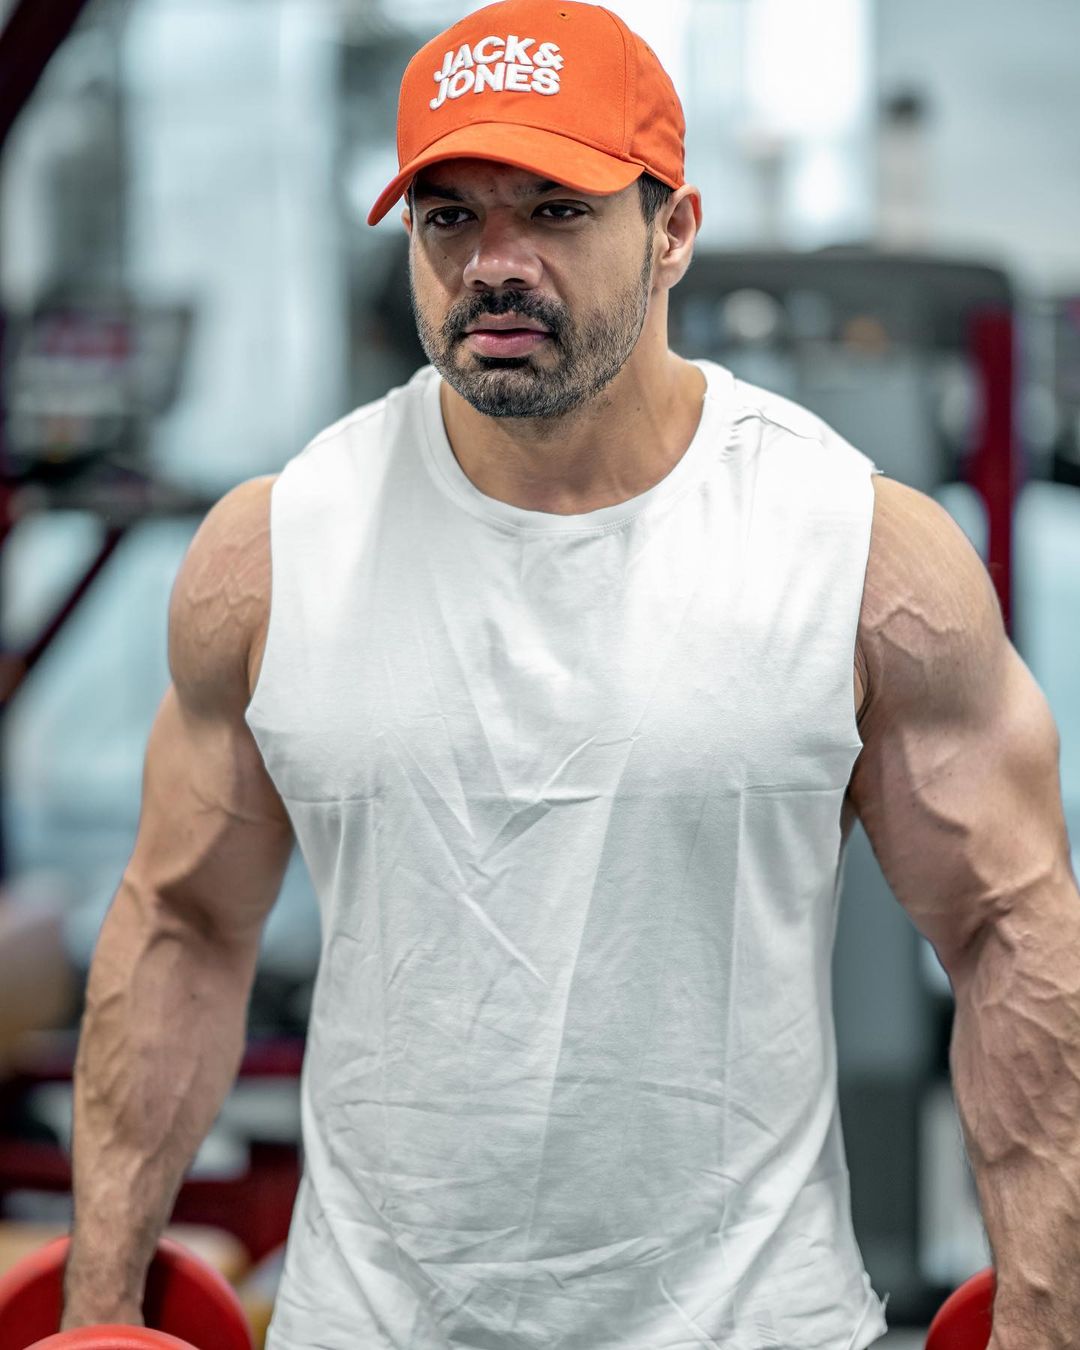 Gaurav Taneja one of the Top Health Influencers of India in White Tank and Orange Cap